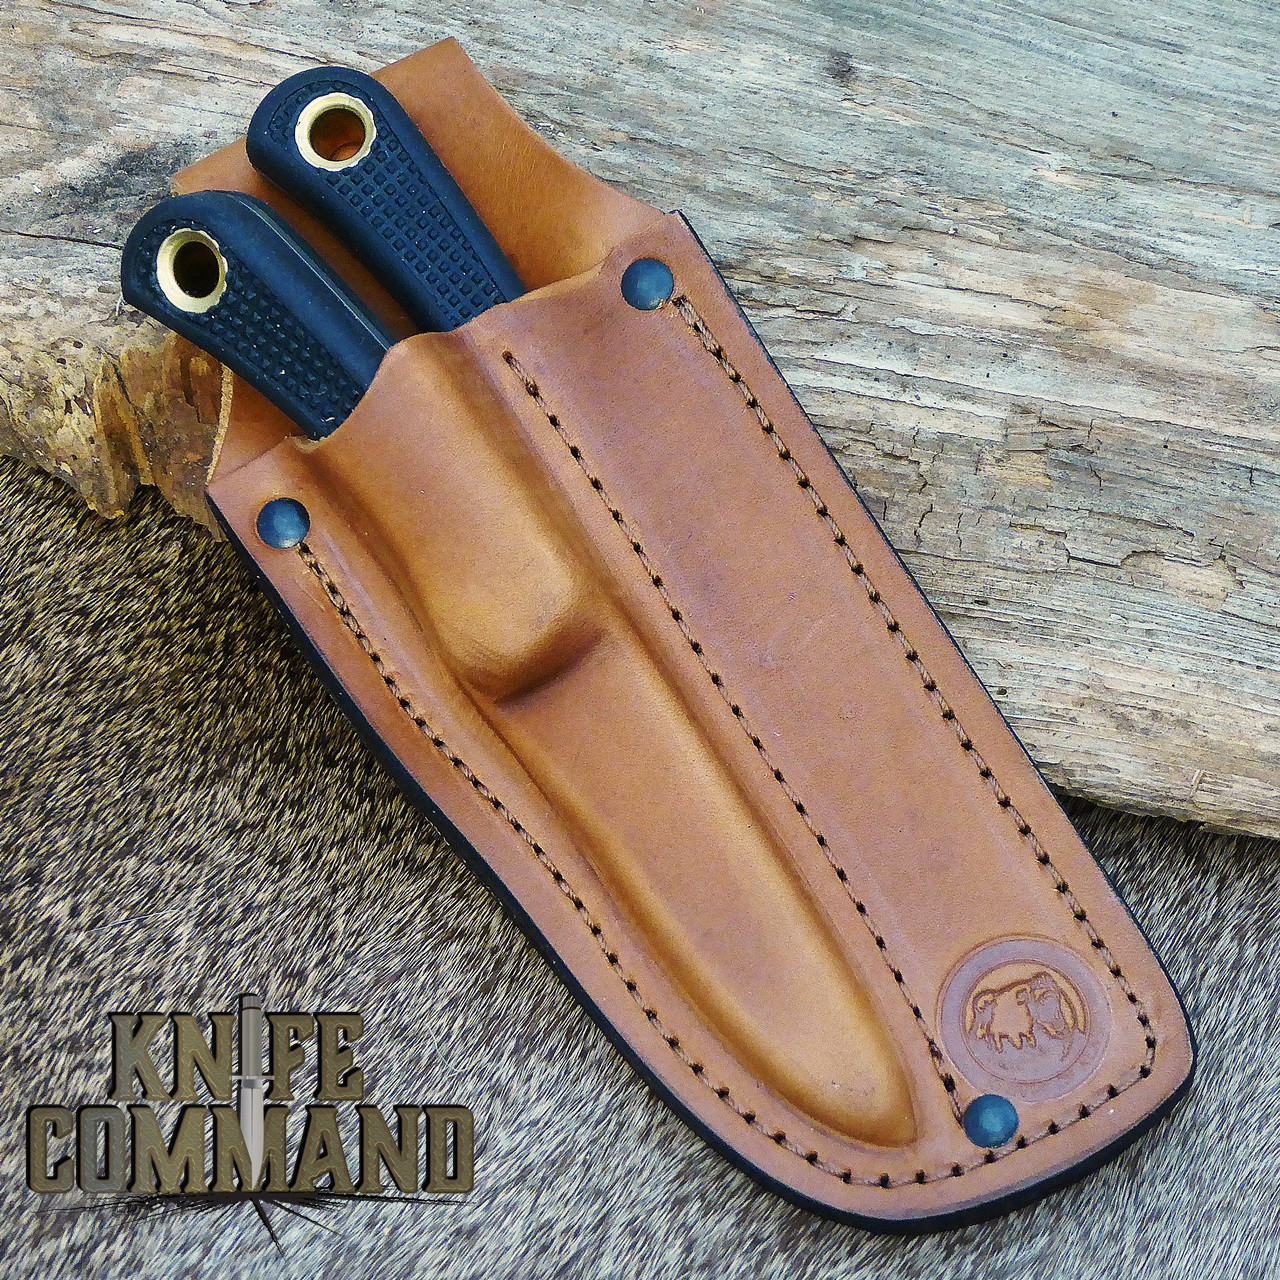 Easy to pack out, both knives in one sheath.